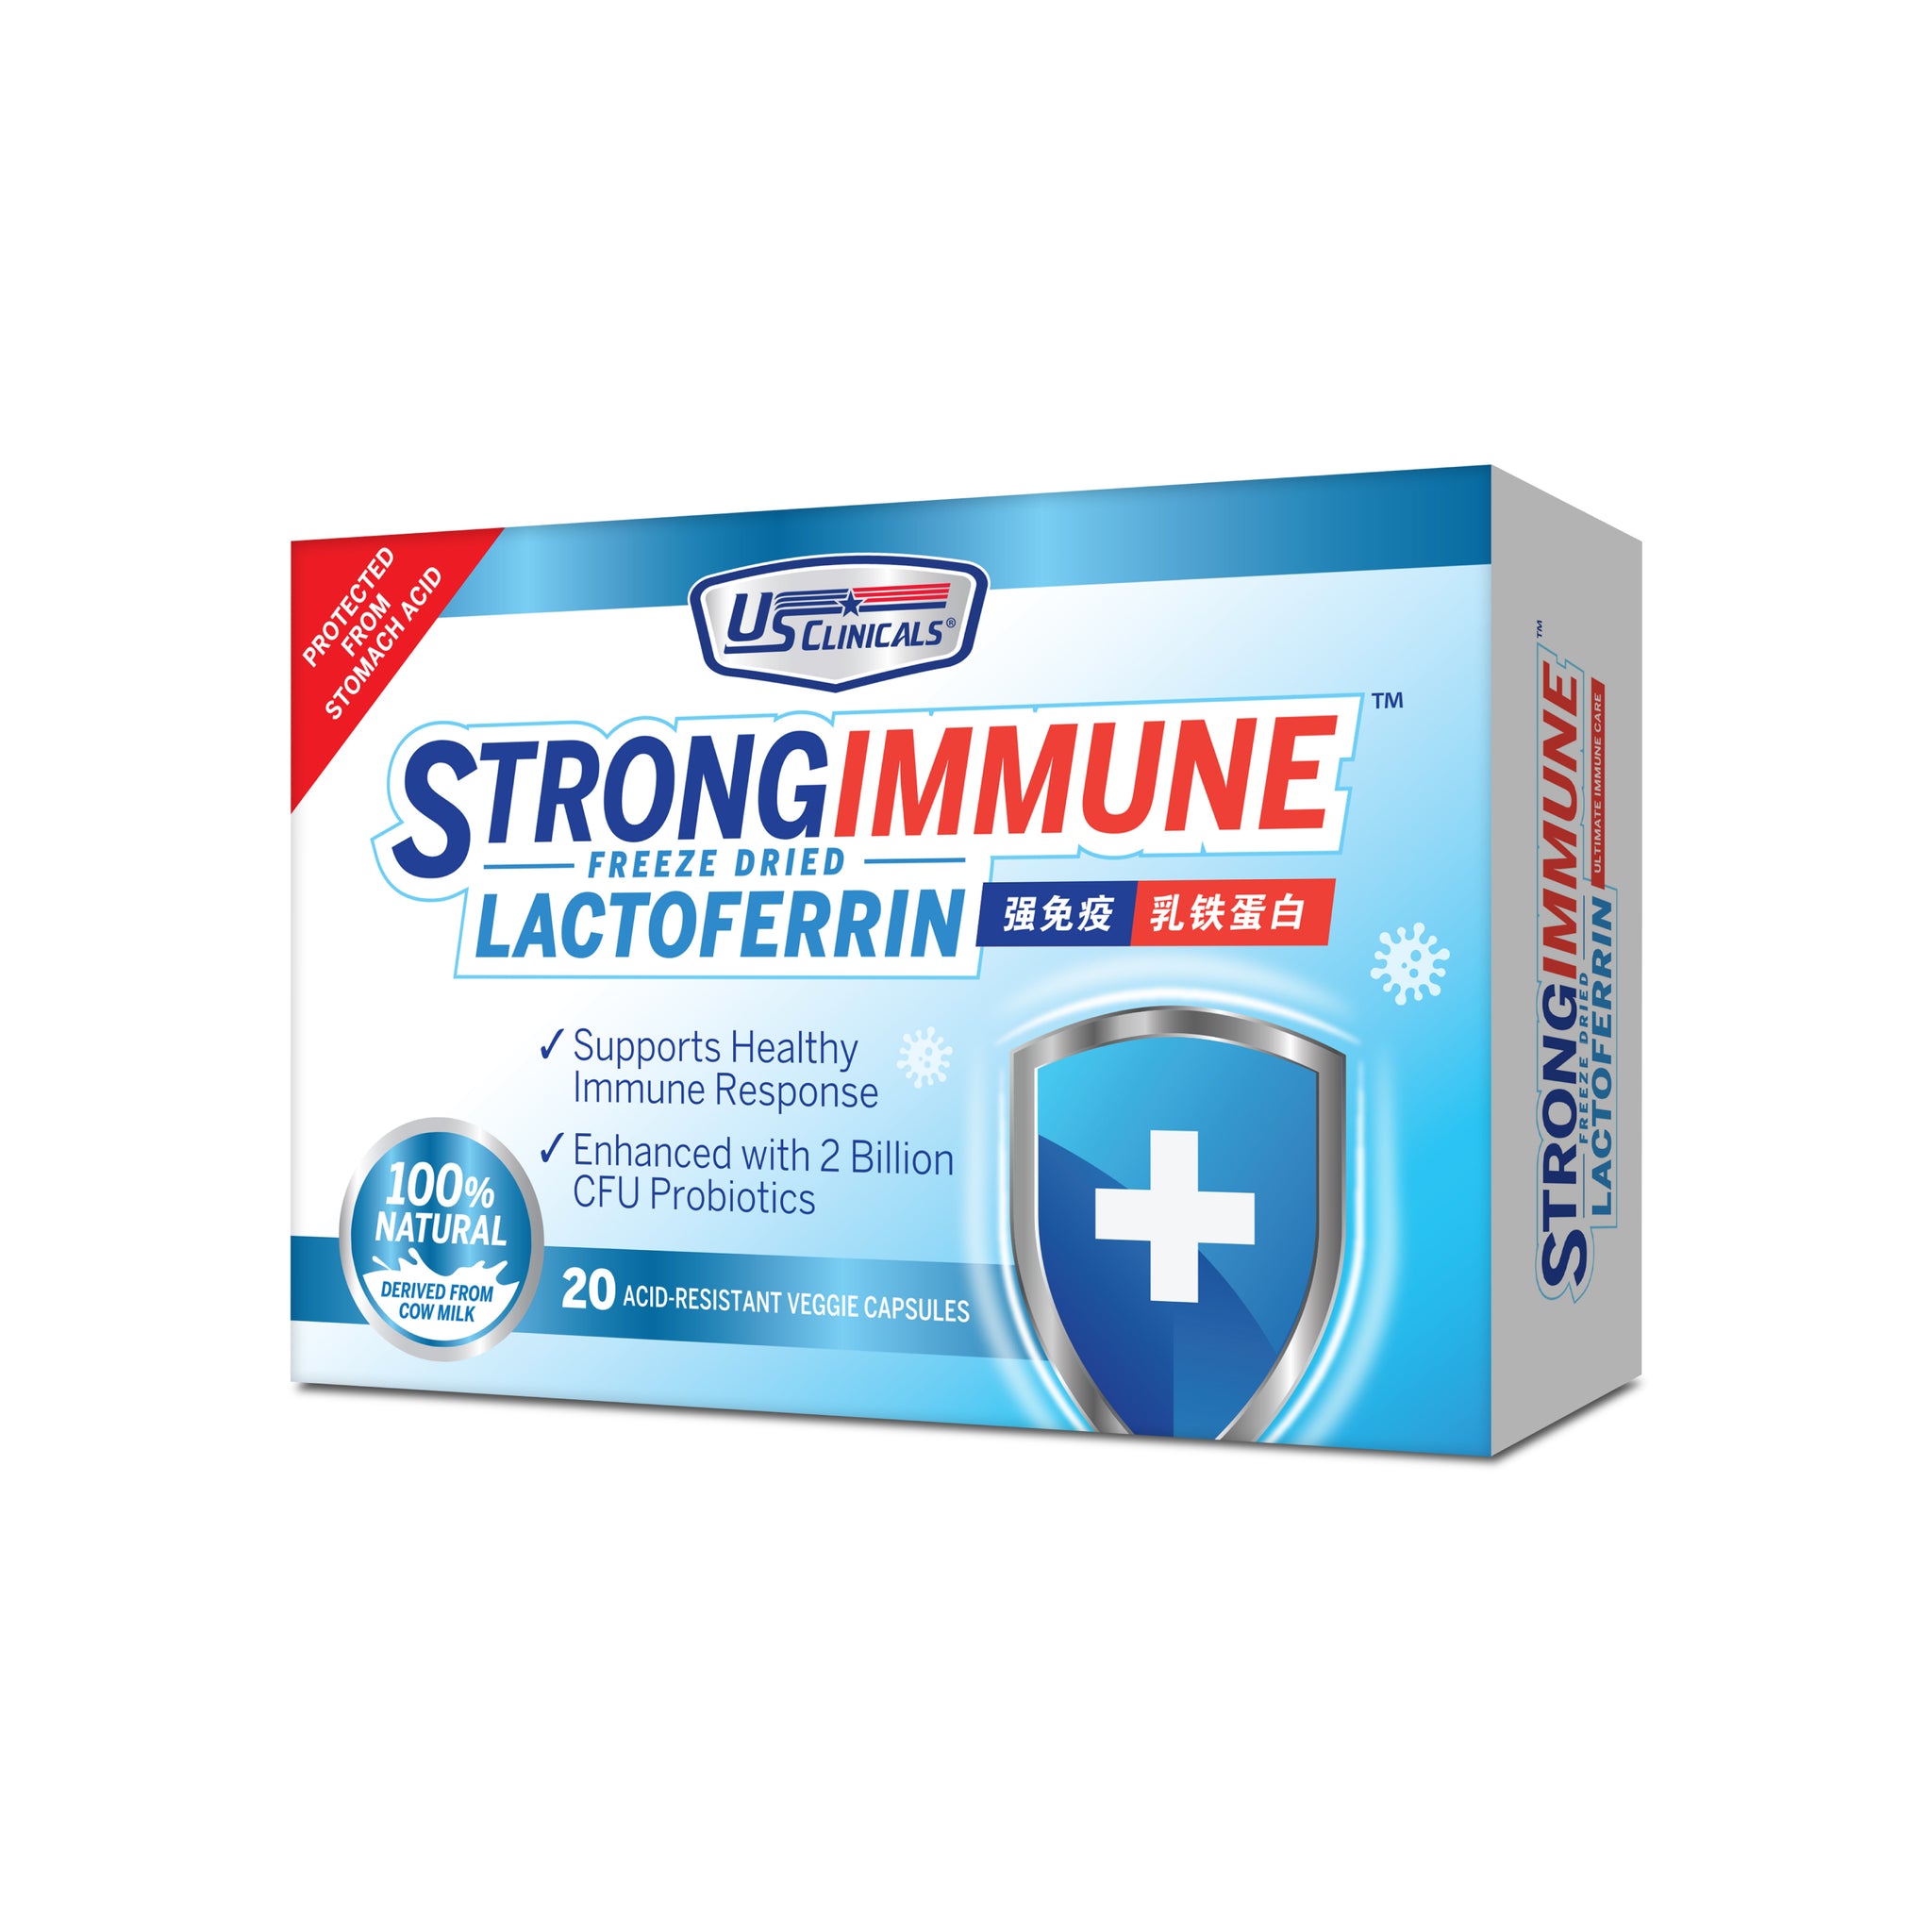 US Clinicals StrongImmune Lactoferrin helps to prevent the entry of COVID-19 as well as promotes post-COVID recovery. Our formulation contains Patented BioSculptor™ Probiotics with scientifically proven to be effective, it helps to strengthen gut health and maintain a beneficial balance of bacteria in the gut.